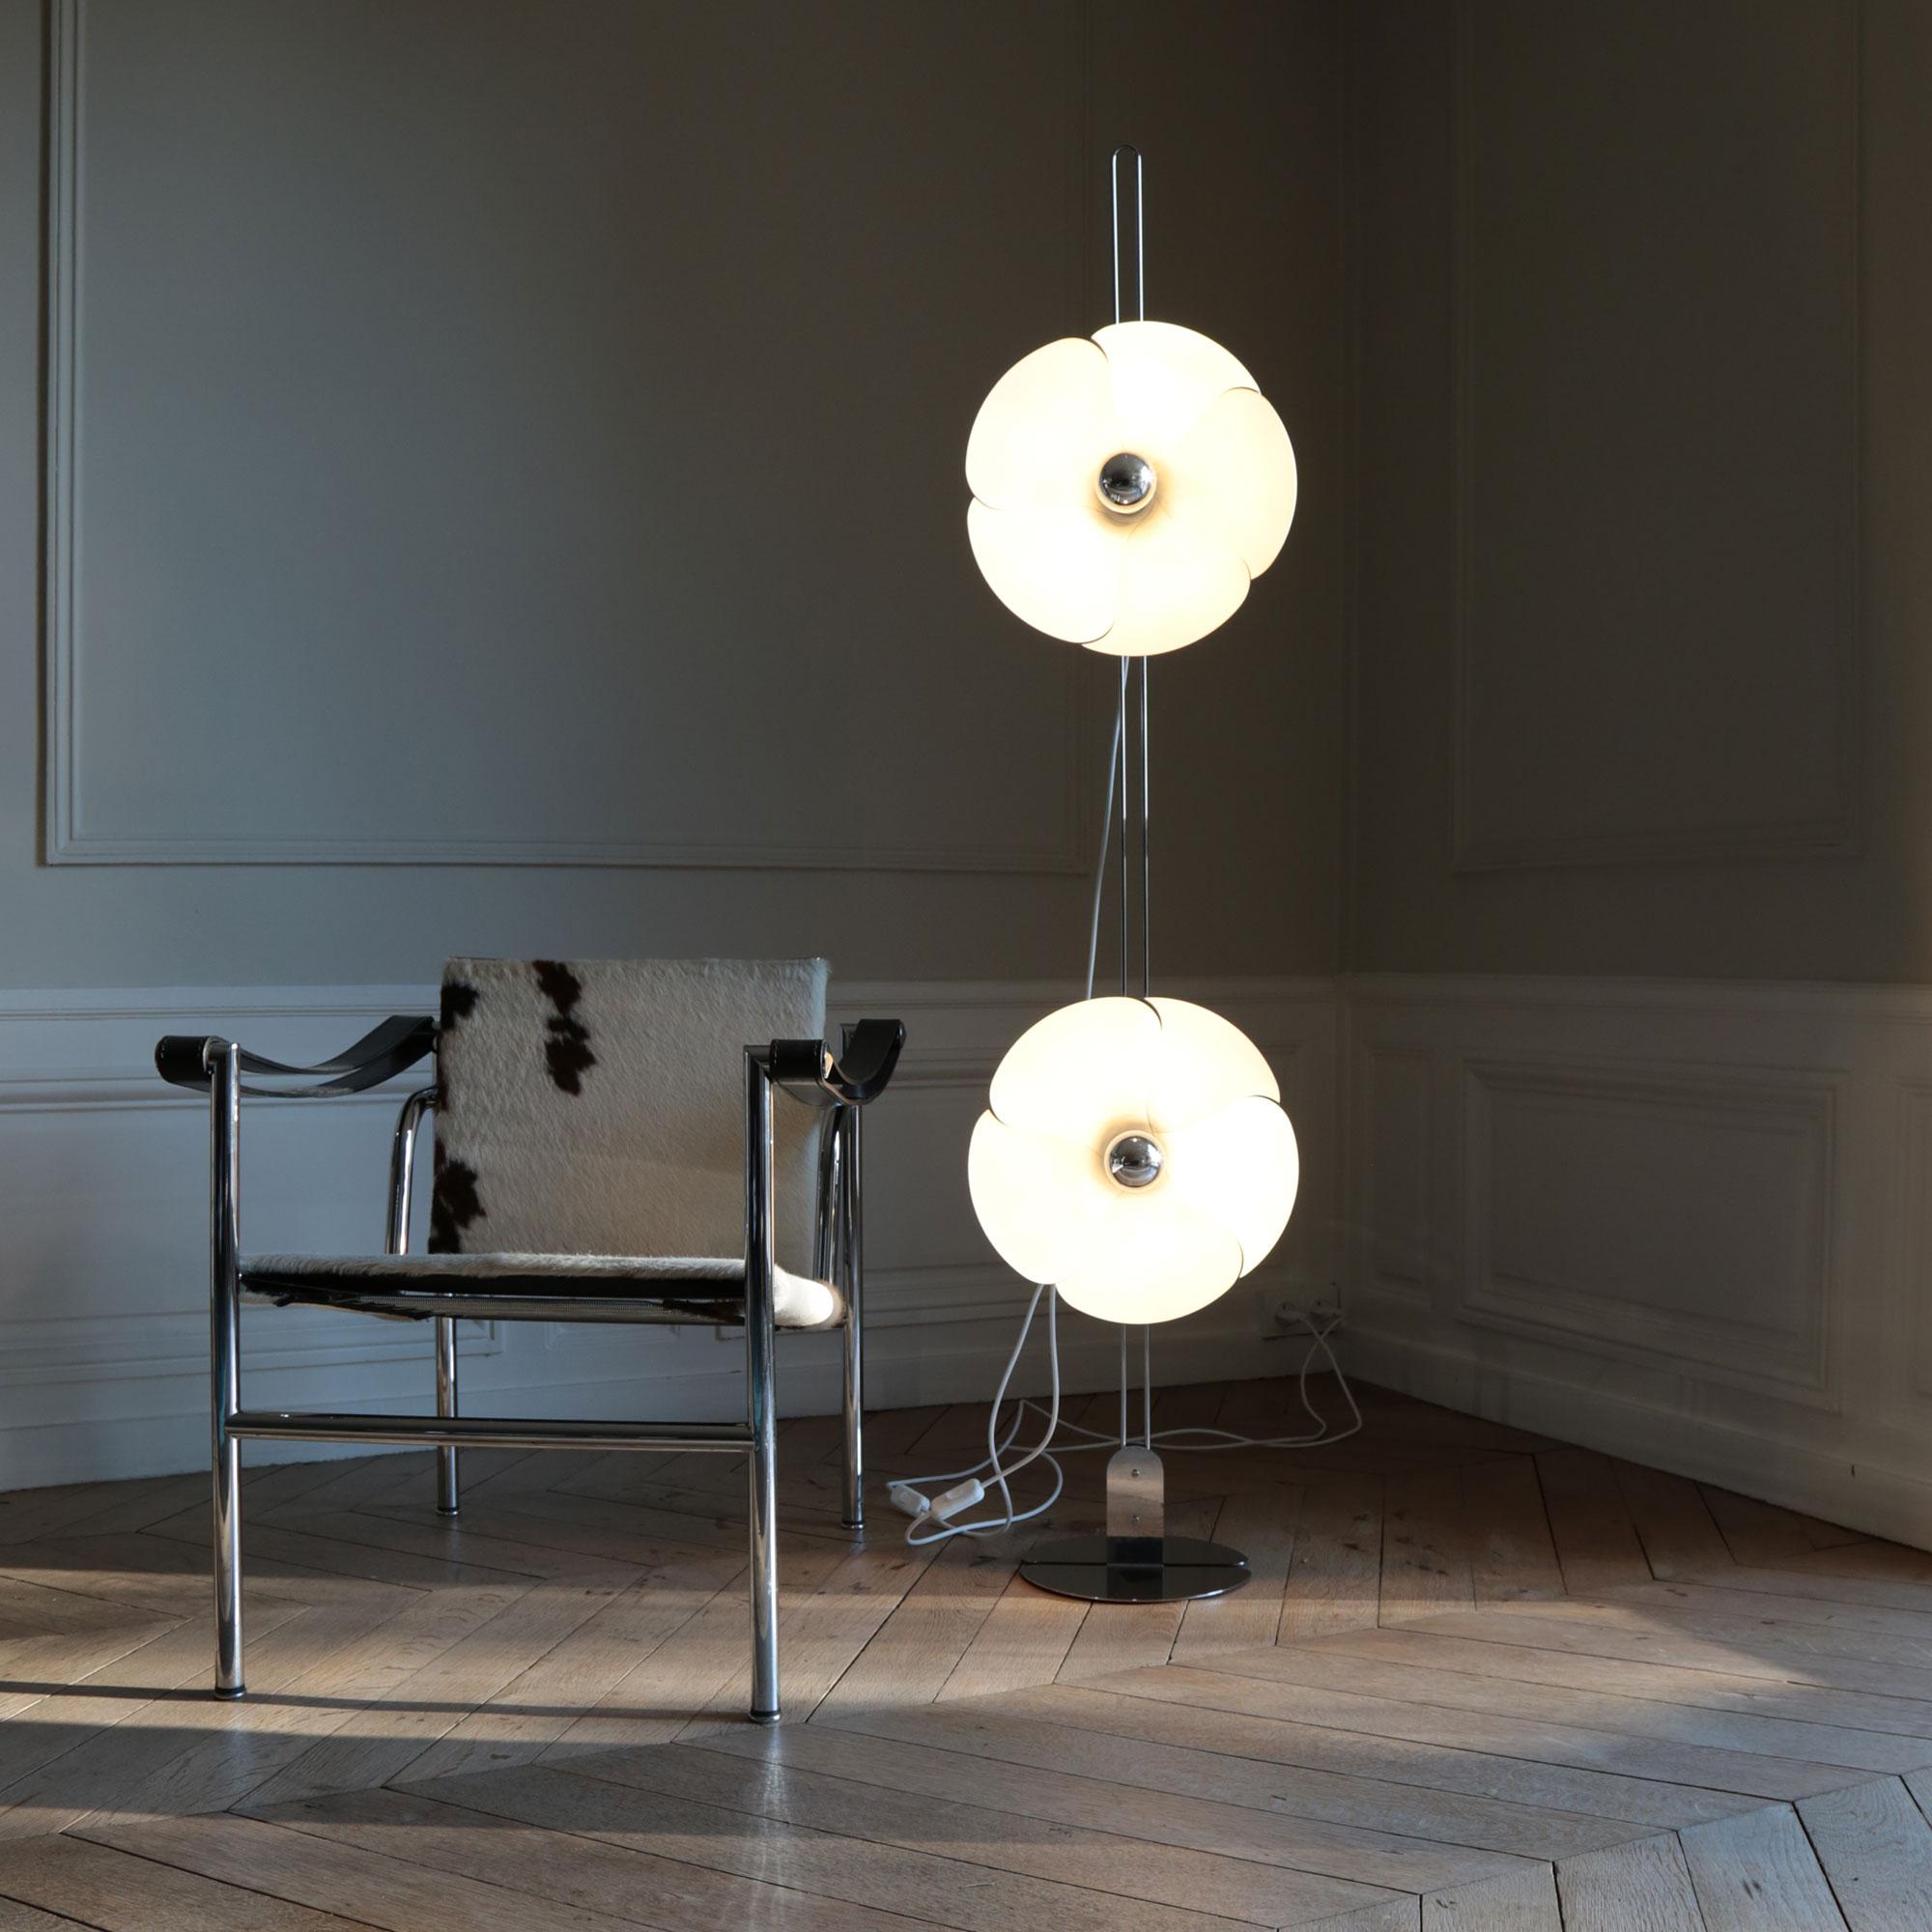 Olivier Mourgue model 2093-225 floor lamp for Disderot. 

Originally designed in 1969, this sculptural floor lamp is a newly produced numbered edition with authentication certificate made in France by Disderot with many of the same small-scale